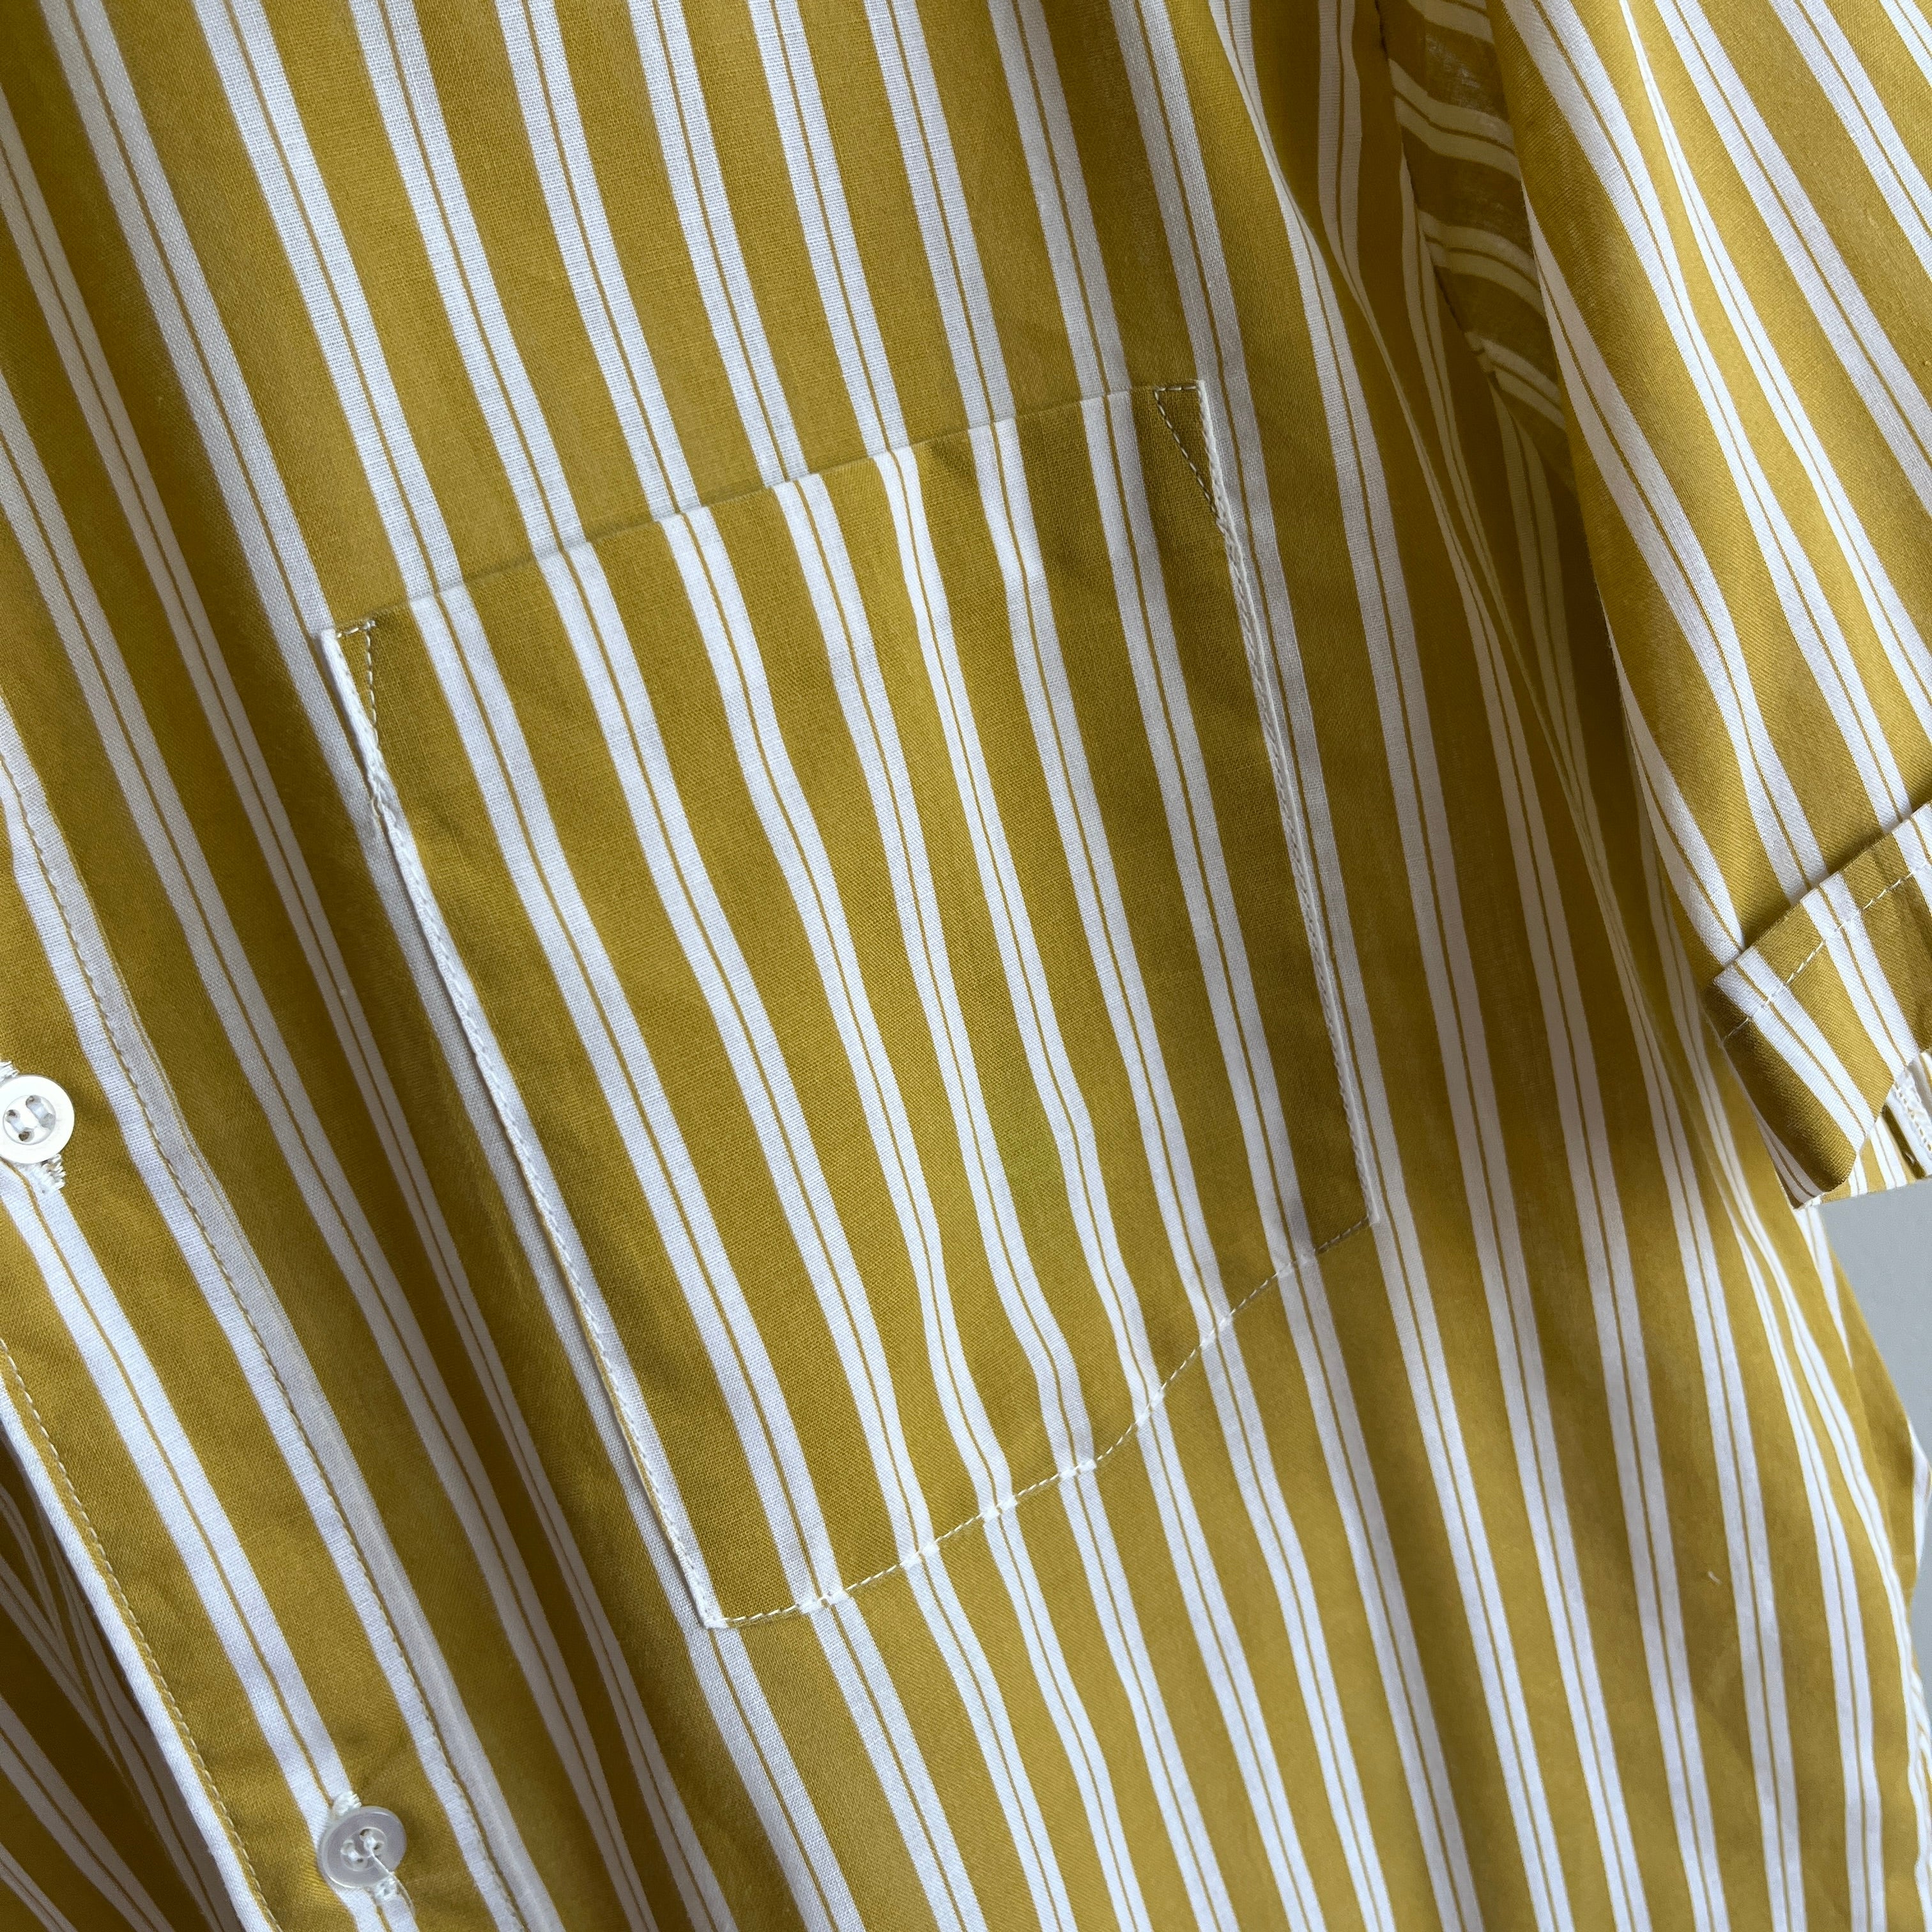 1980s Mustard and White Striped Short Sleeve Button Up Shirt